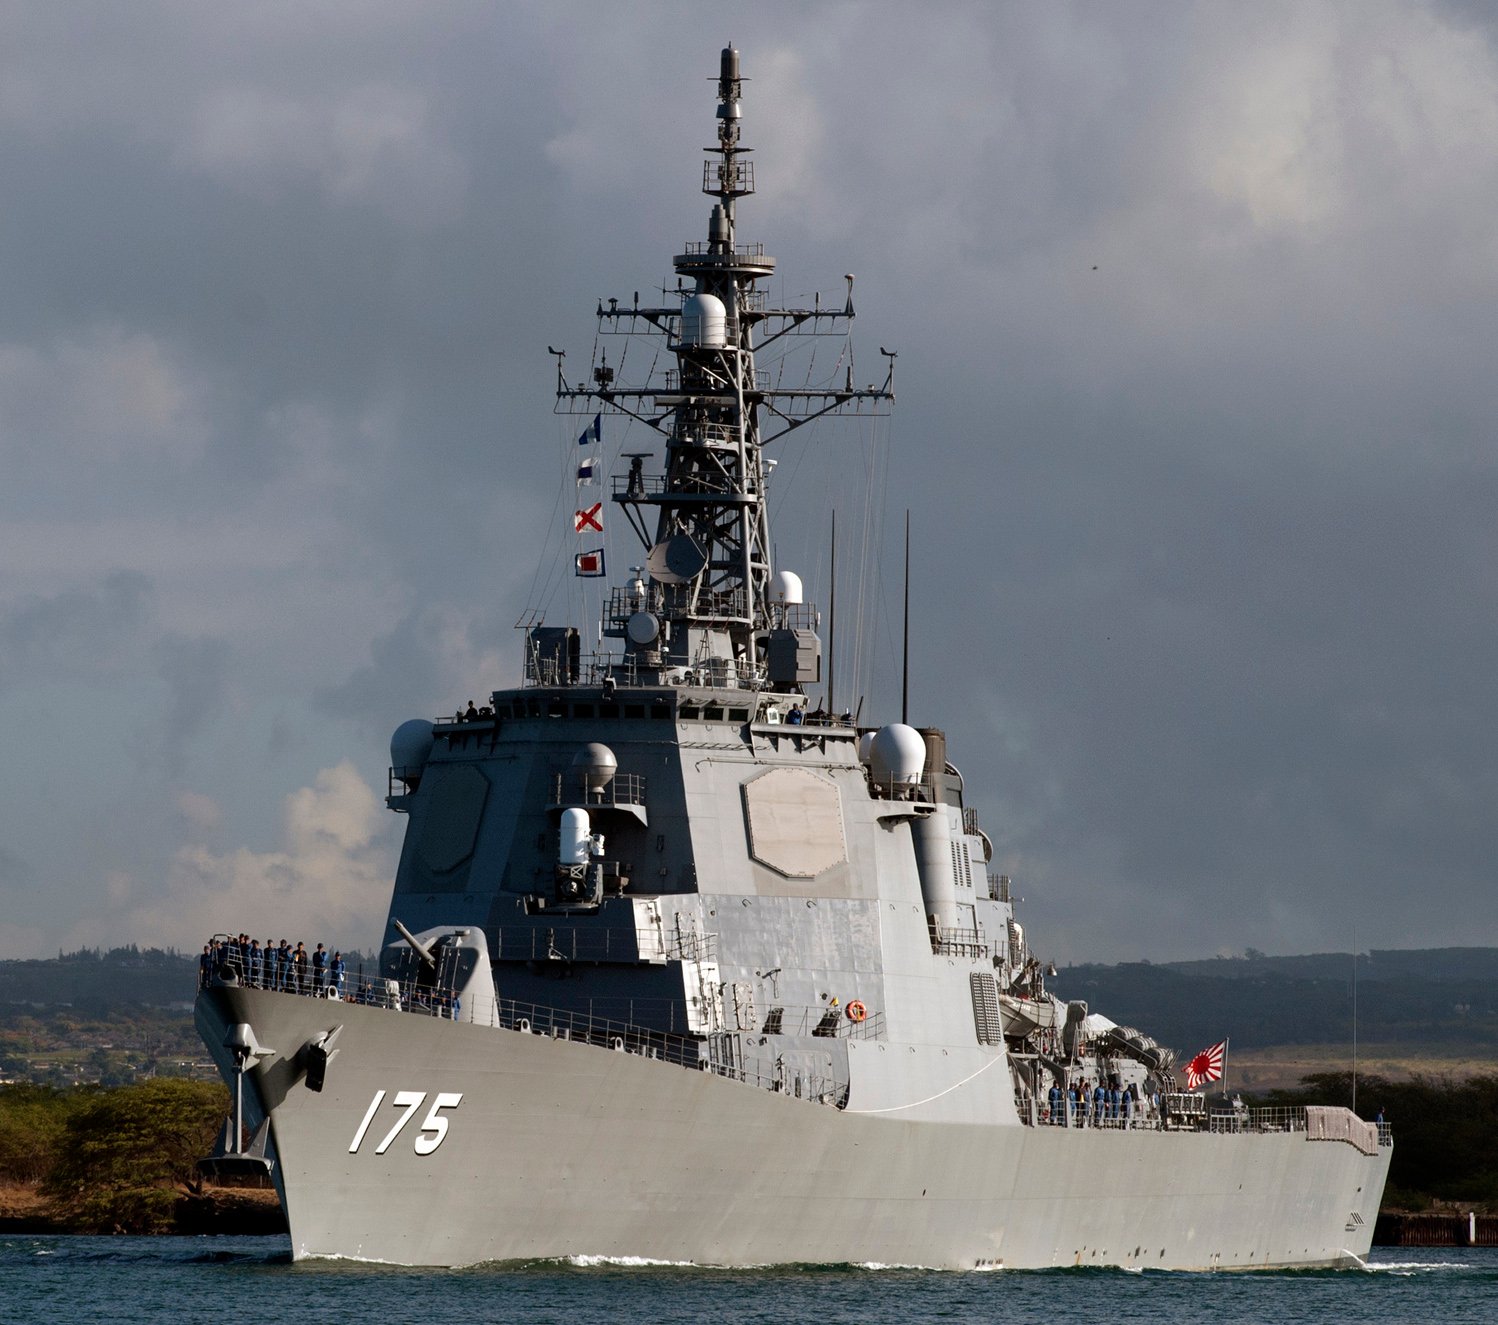 The Japan Maritime Self-Defense Force Kongo-class guided-missile destroyer JDS Myoko (DDG 175) pulls out of Joint Base Pearl Harbor-Hickam to support Rim of the Pacific (RIMPAC) 2012. US Navy Photo